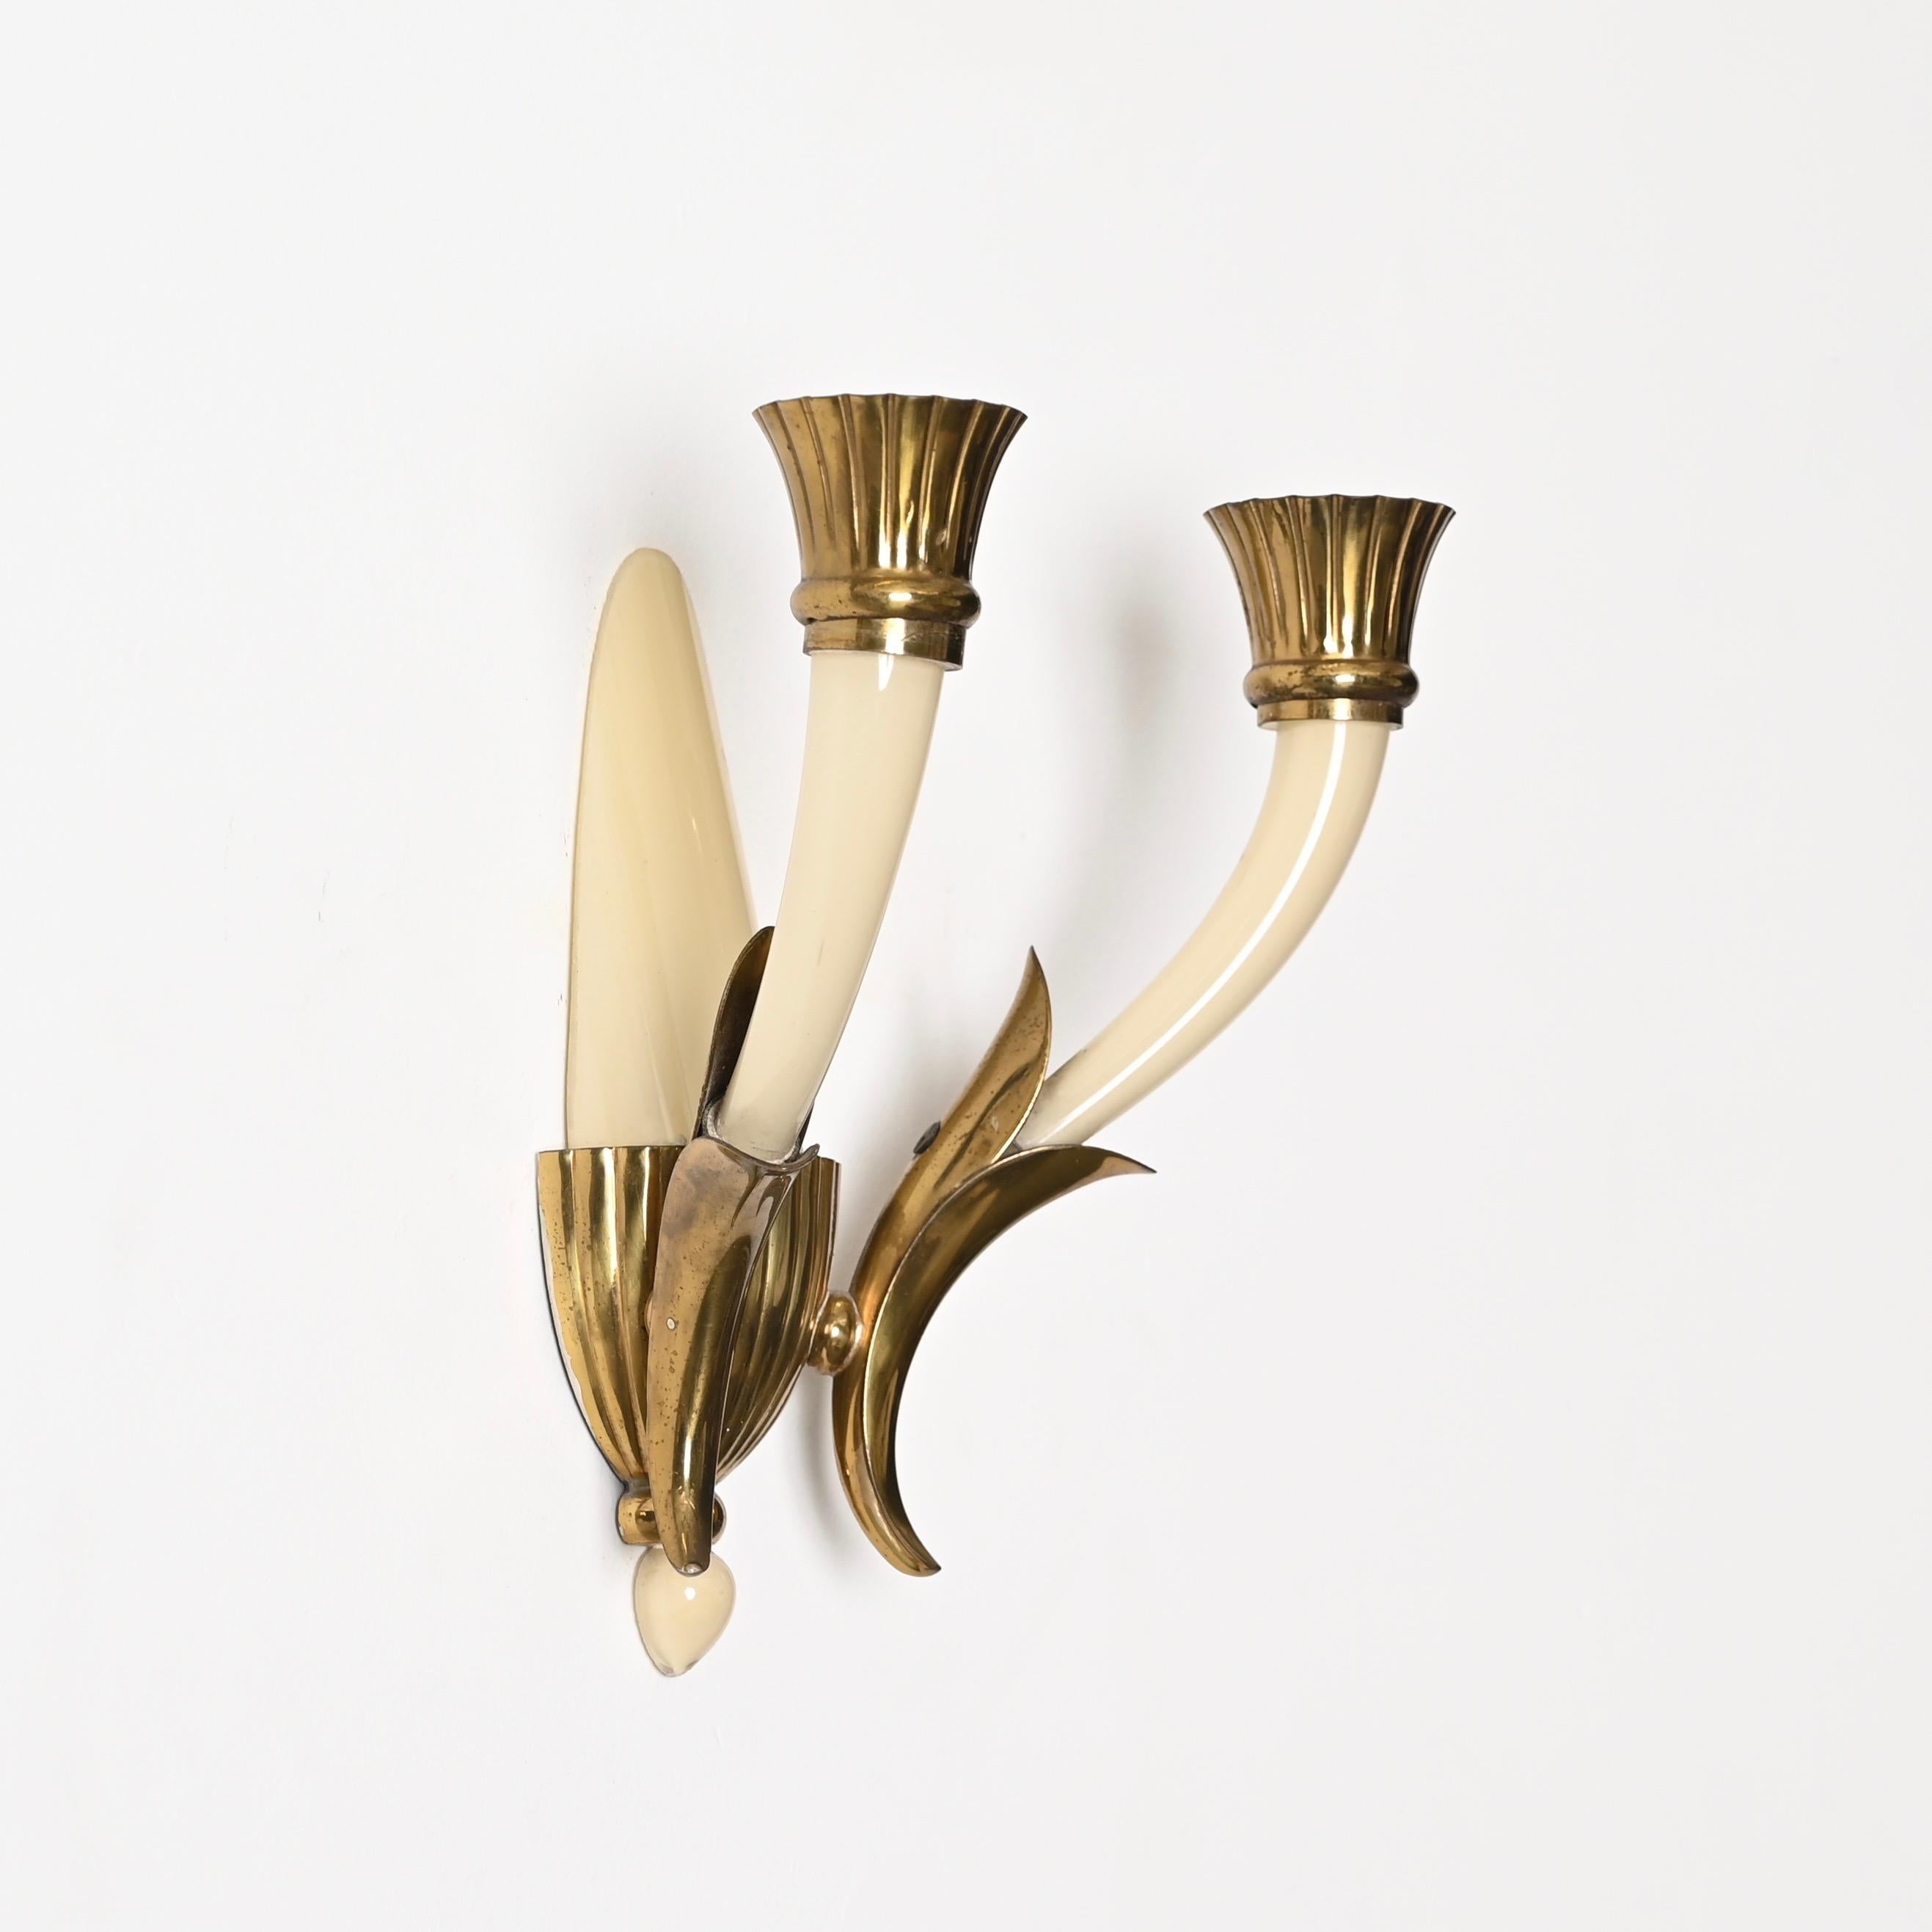 Magnificent pair of wall lamps in a gorgeous ivory Murano artglass and brass. These charming sconces were designed by Guglielmo Ulrich and produced in Venice, Italy during the 1940s. 

The quality of these rare sconces is mind-blowing, fully made in